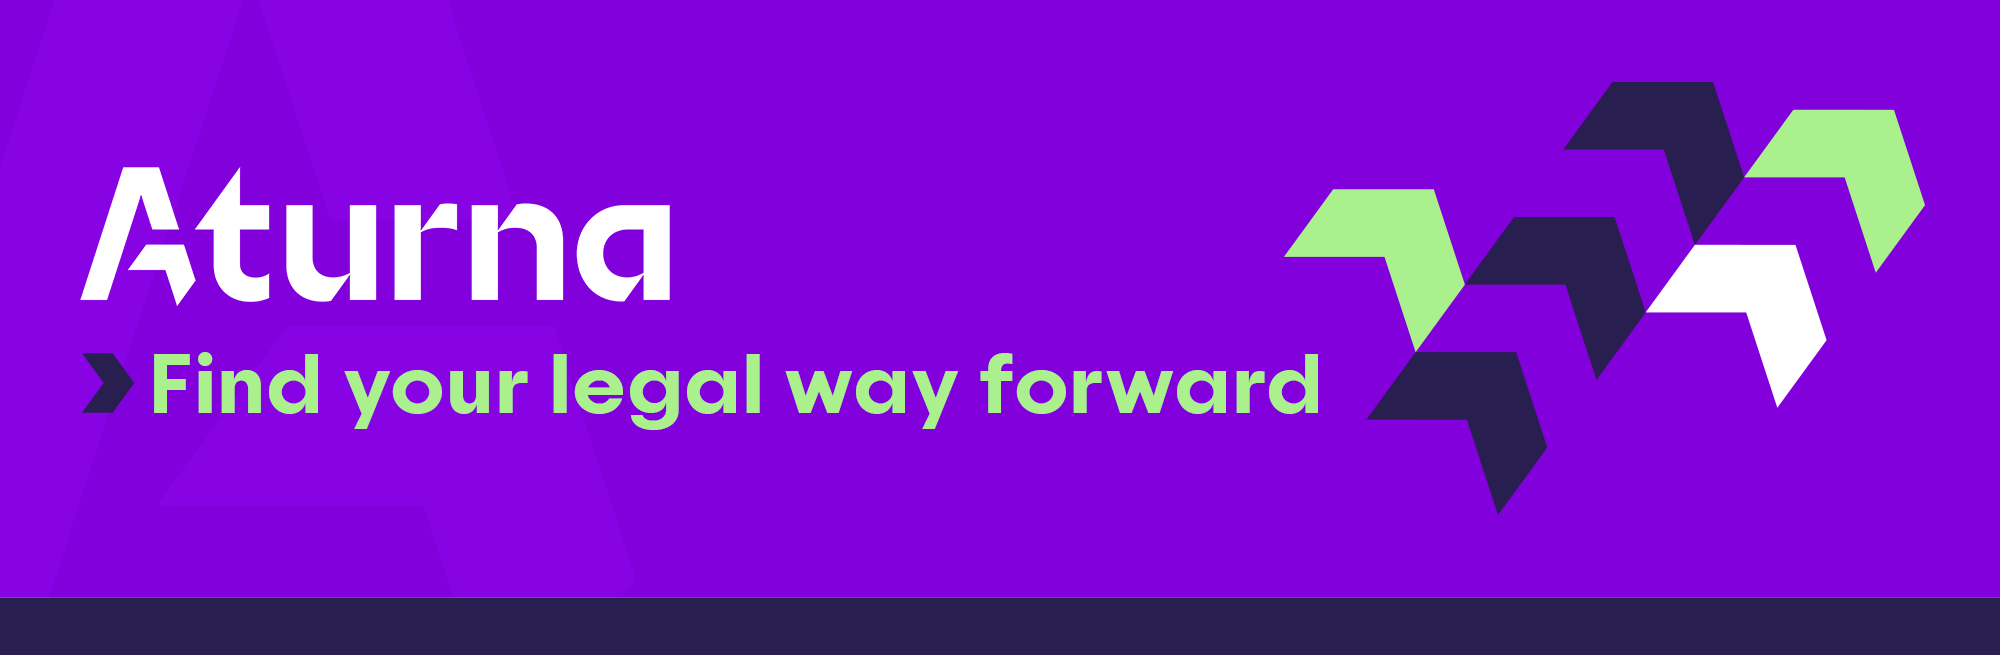 Aturna - Find your legal way forward